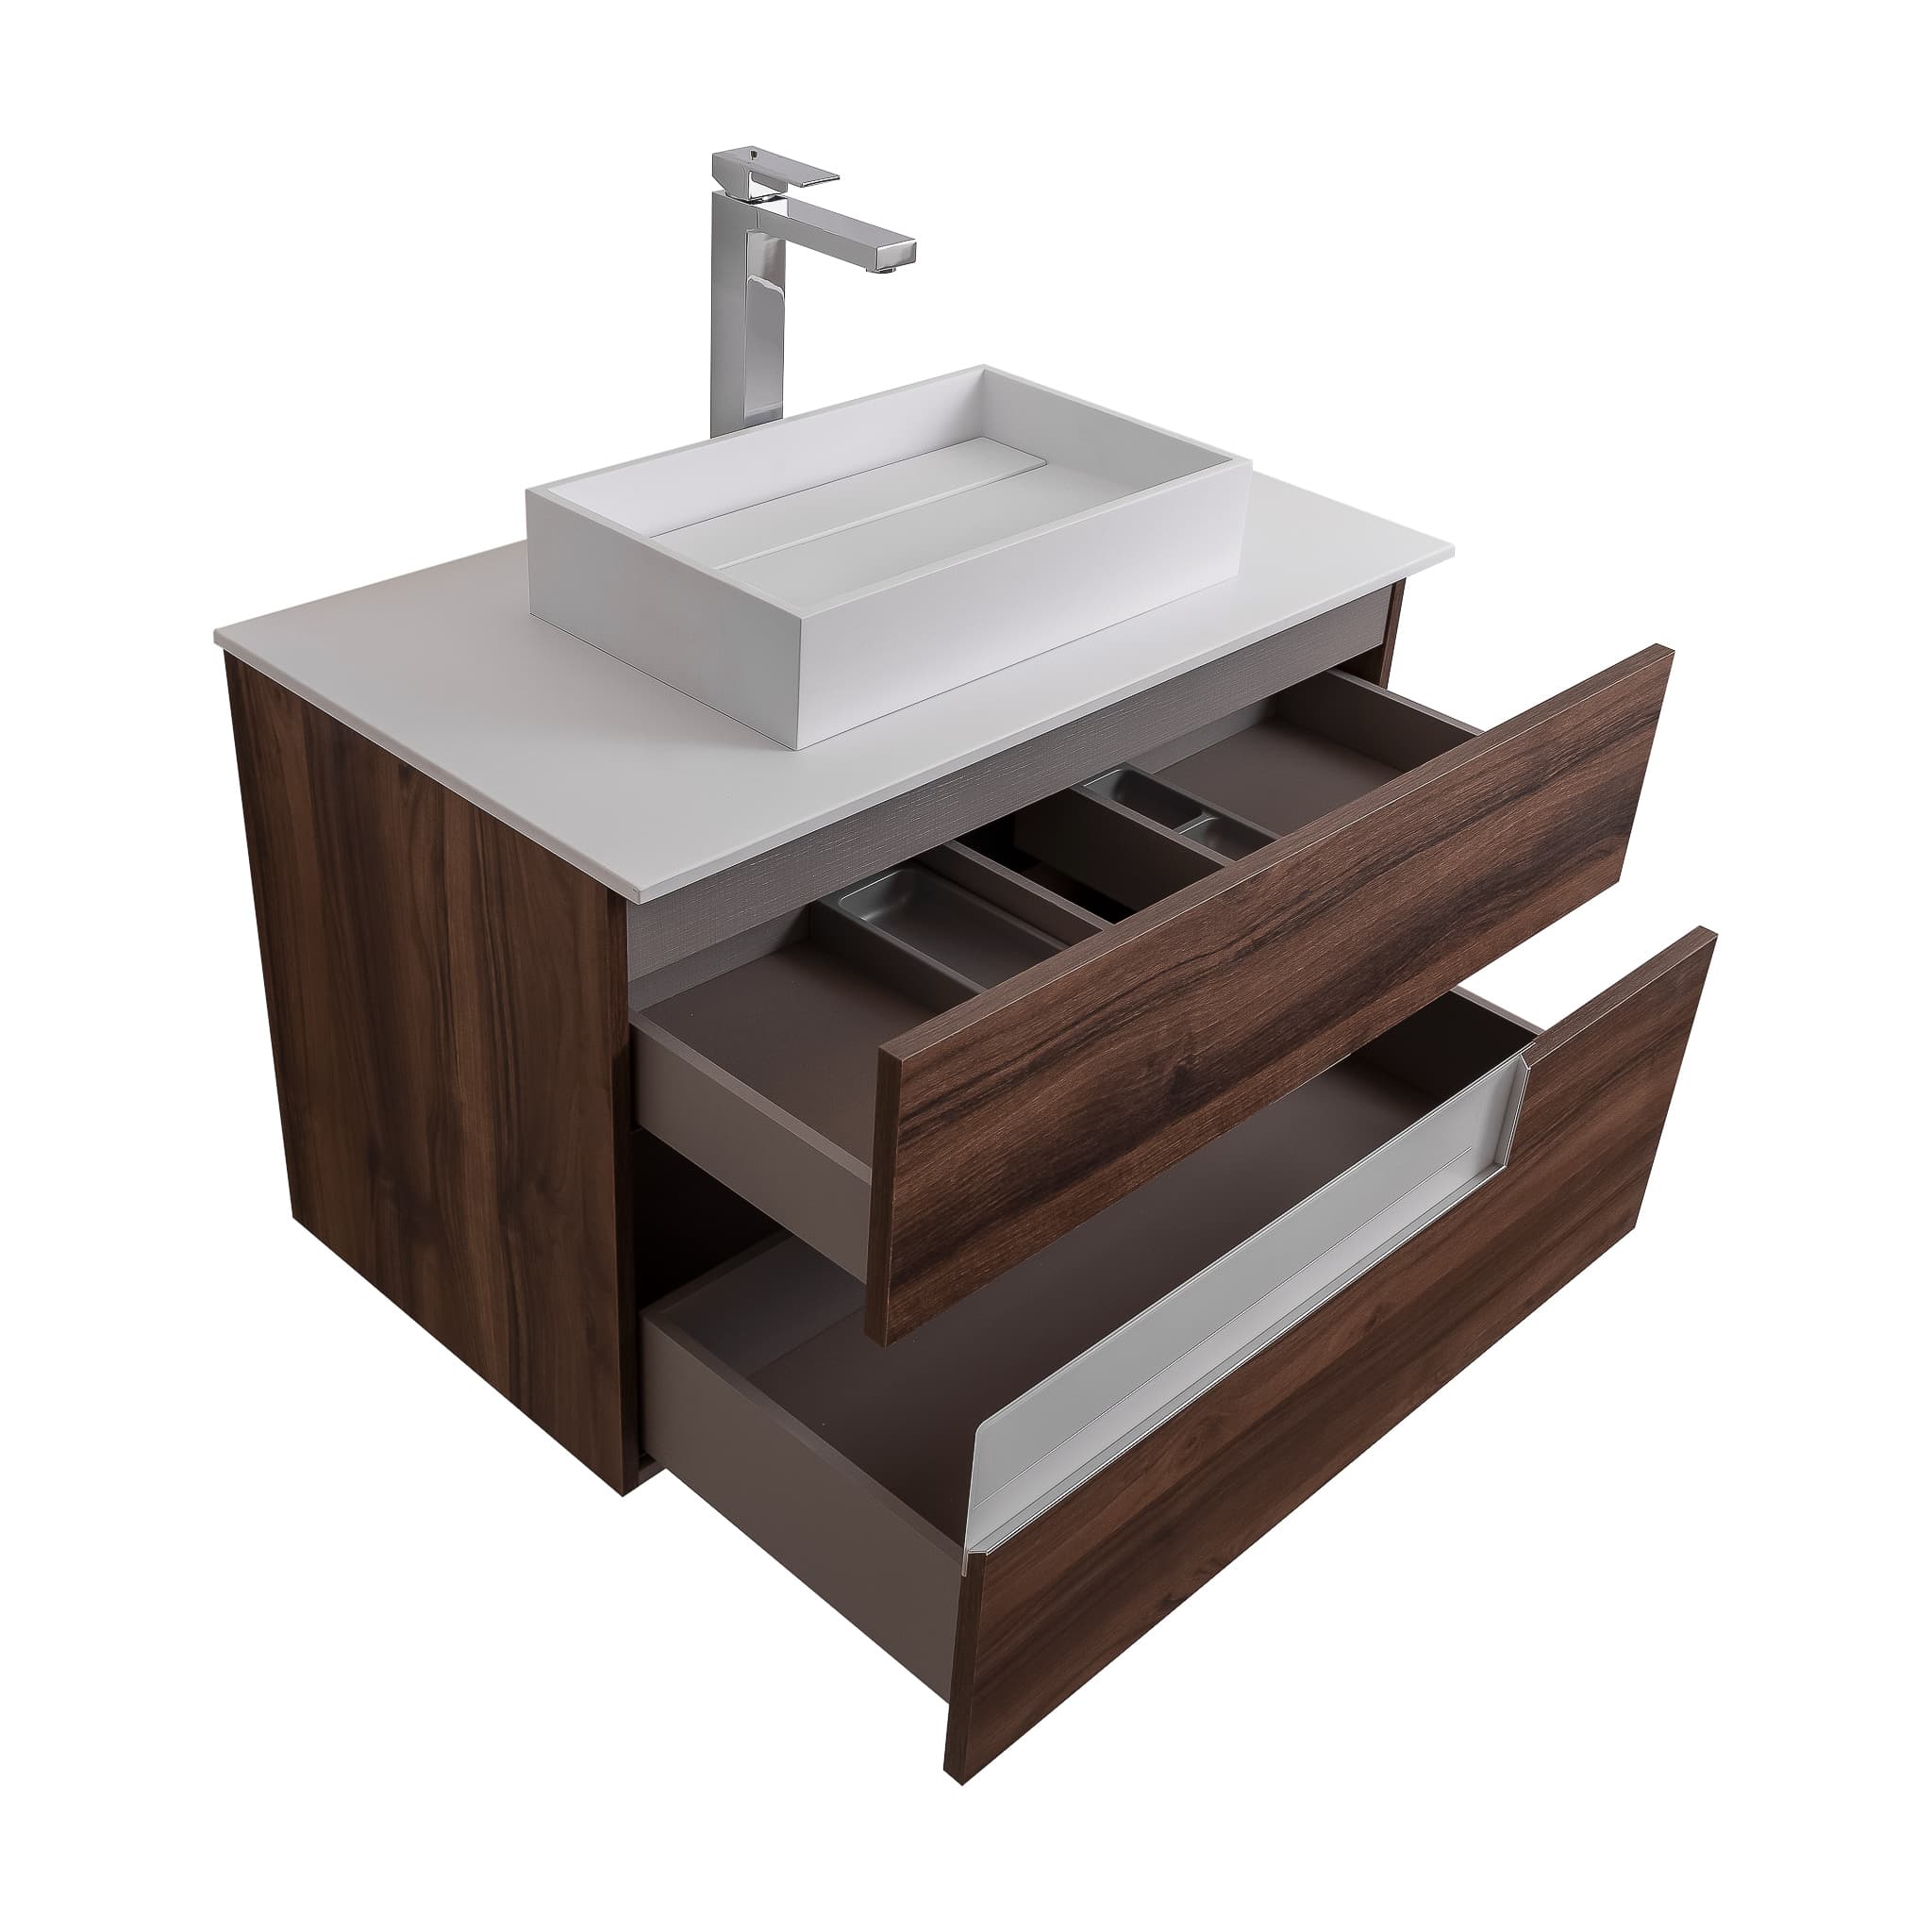 Vision 39.5 Valenti Medium Brown Wood Cabinet, Solid Surface Flat White Counter And Infinity Square Solid Surface White Basin 1329, Wall Mounted Modern Vanity Set